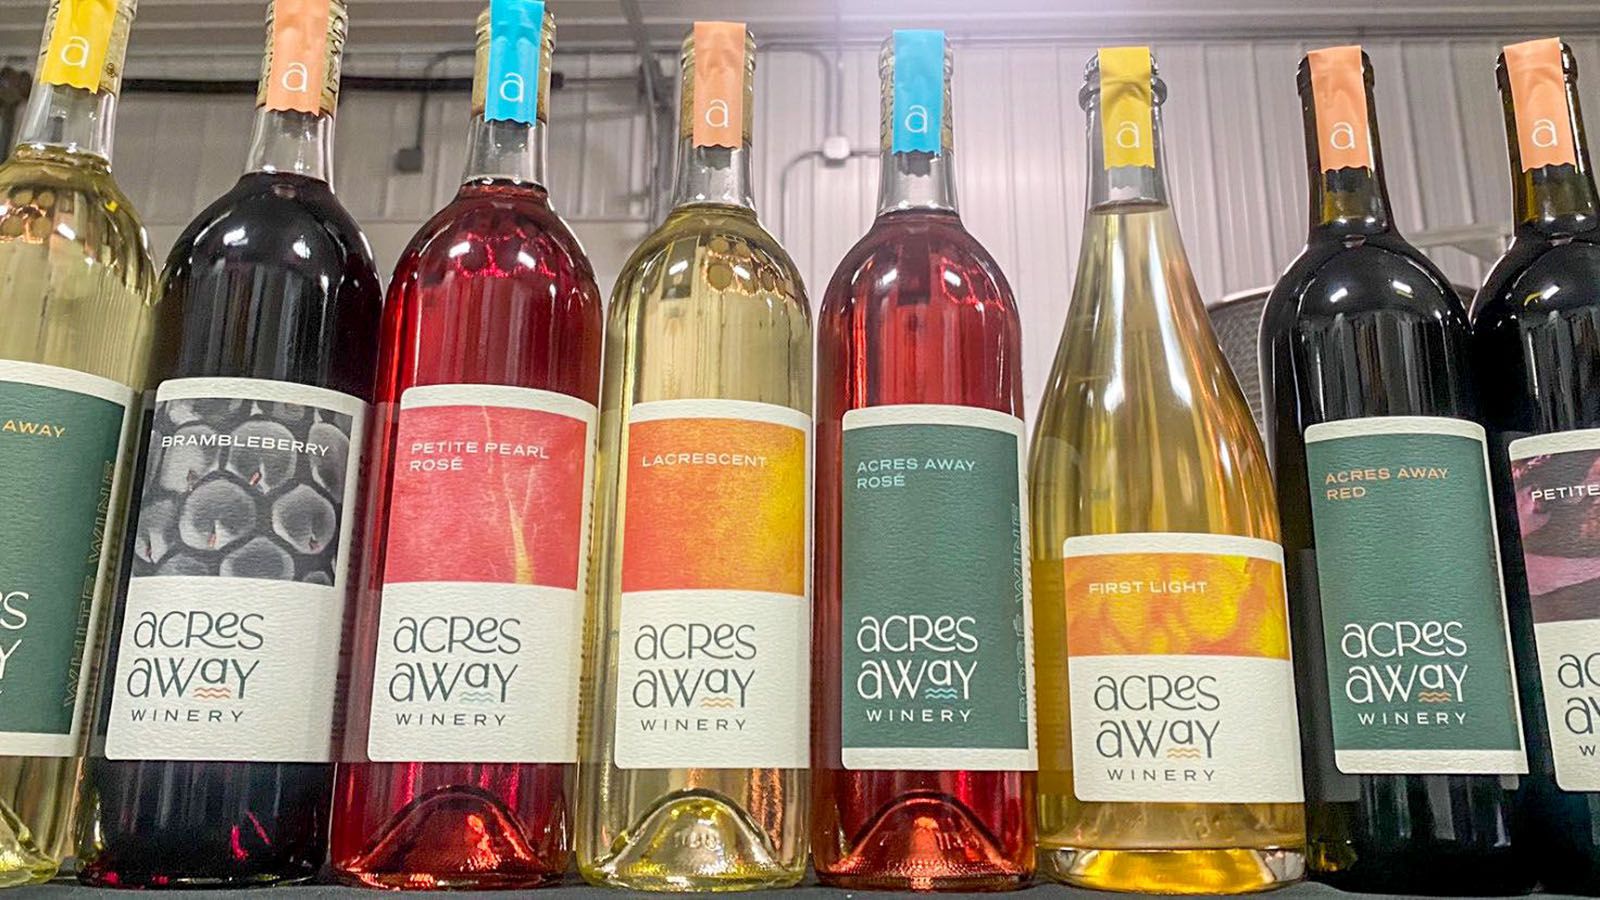 What was once Hartland Winery & Vineyards in Ashley is now Acres Away Winery.